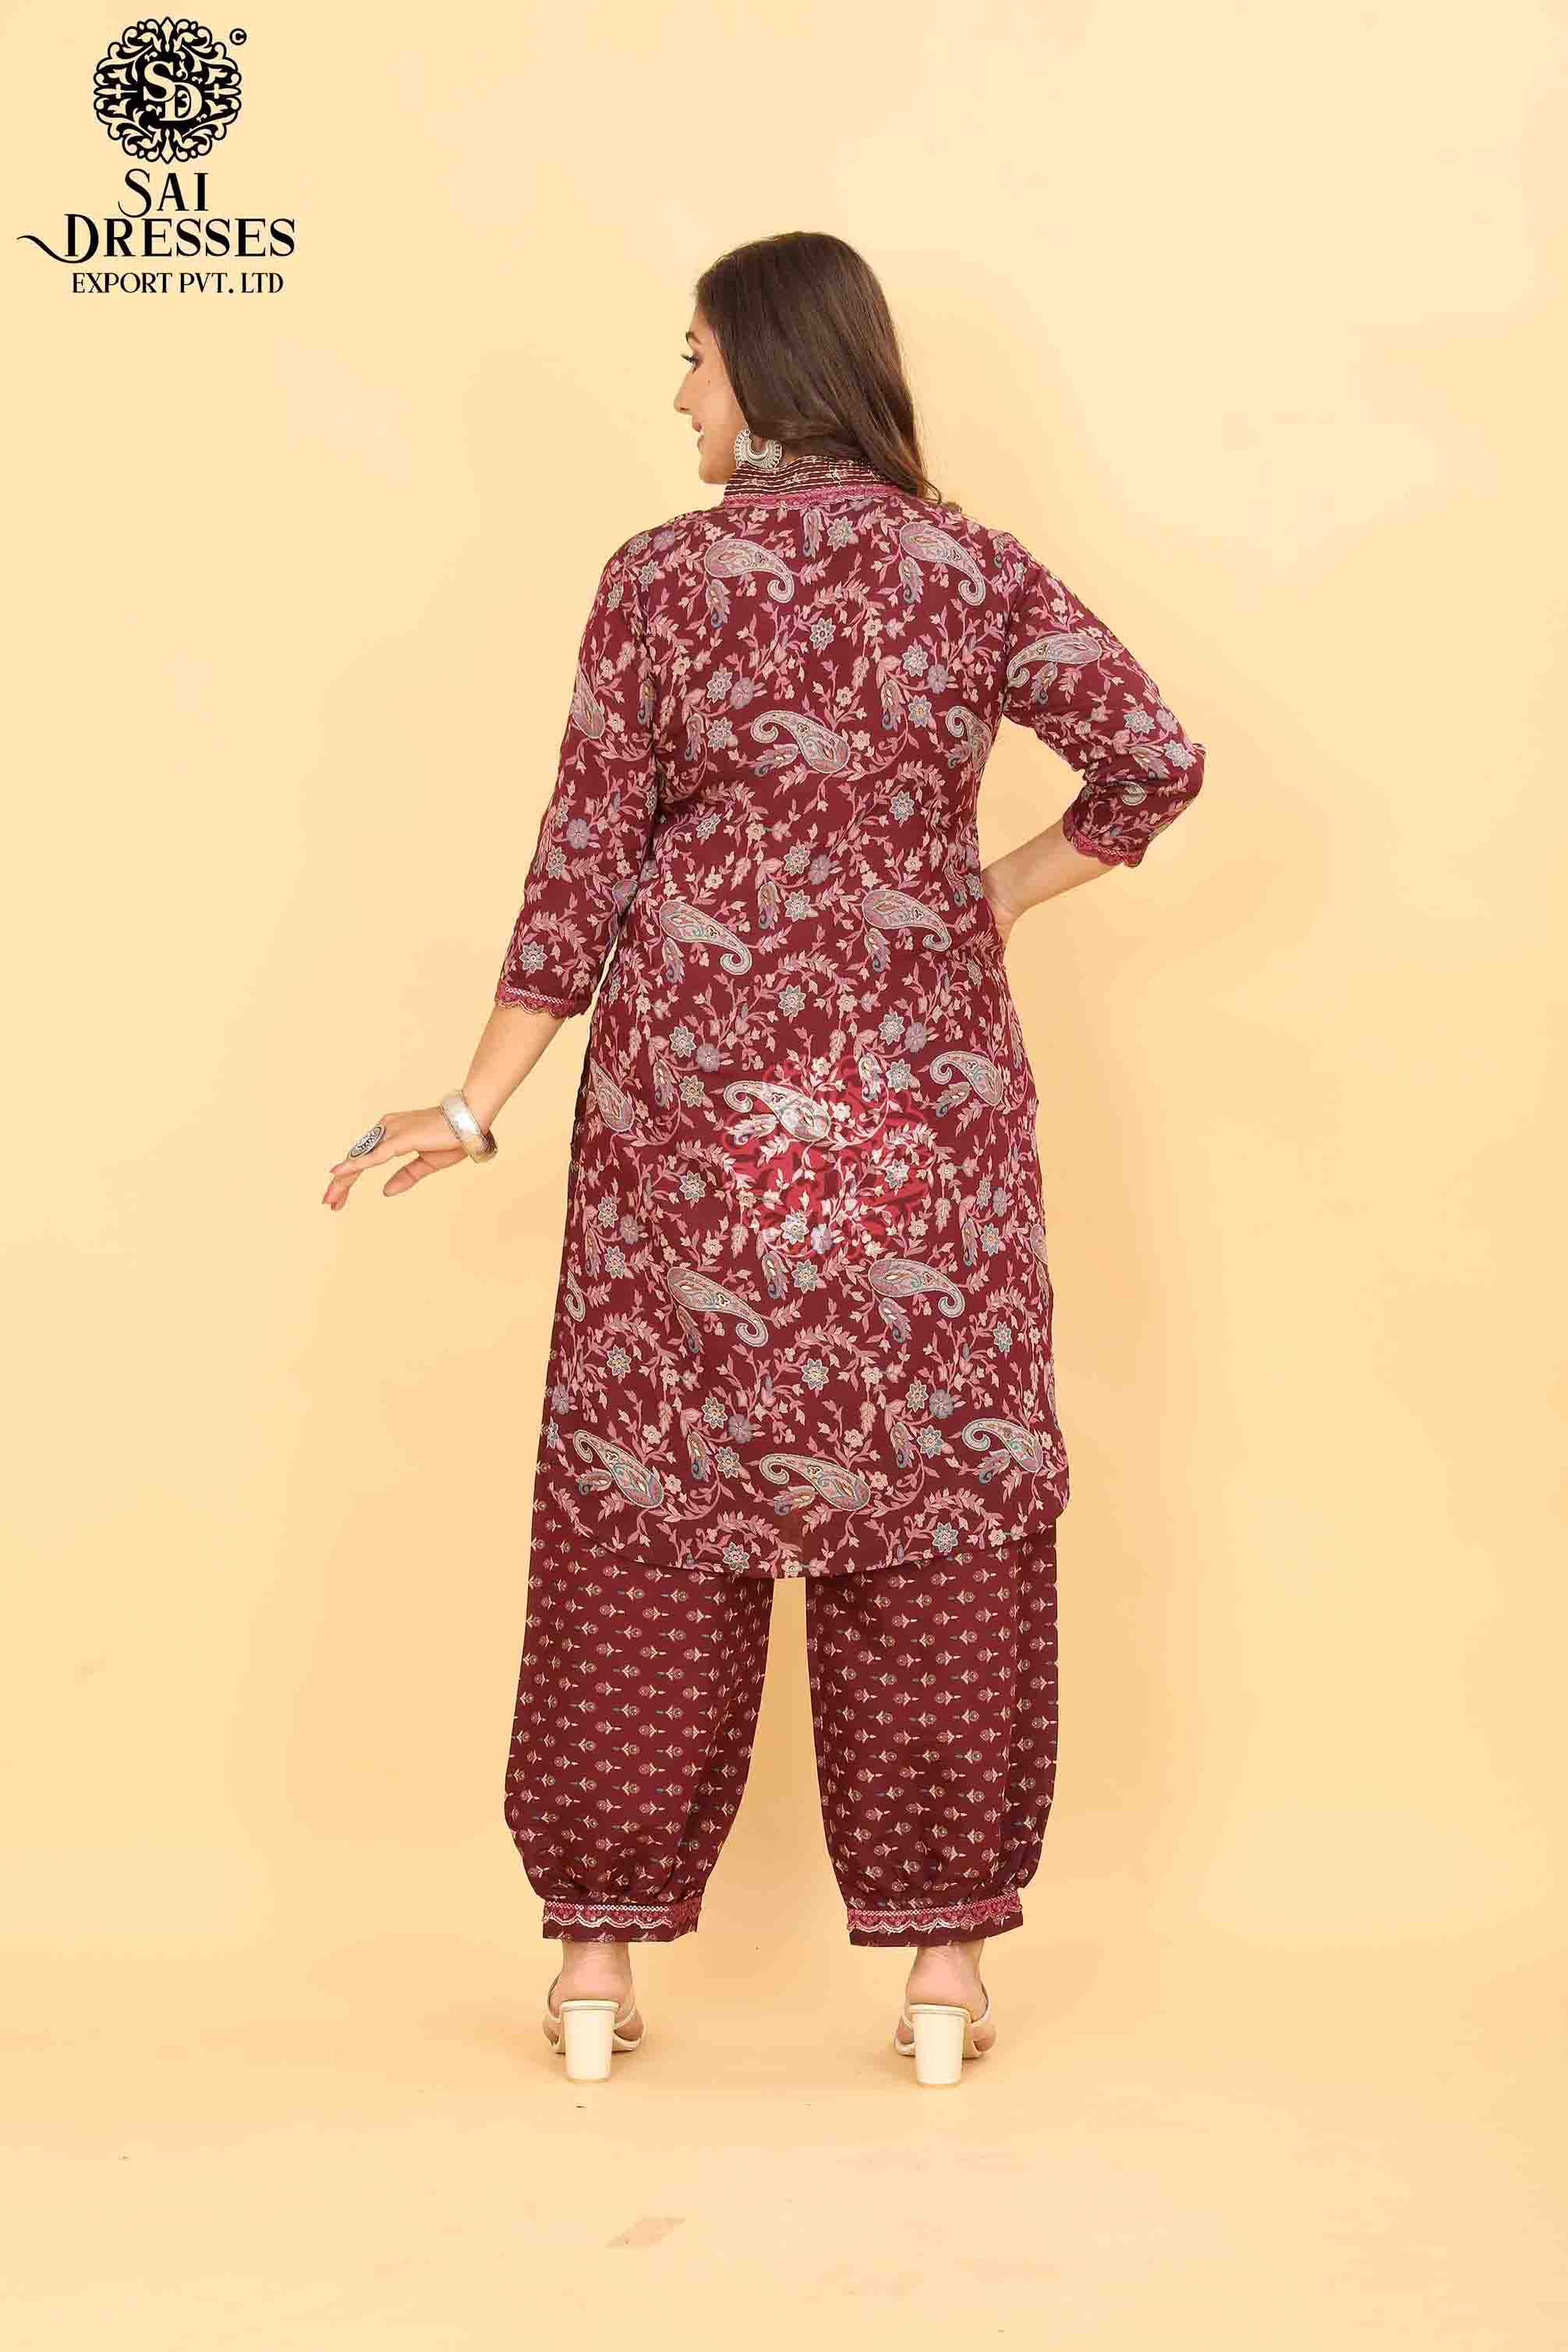 SAI DRESSES PRESENT D.NO SD 5014 READY TO EXCLUSIVE TRENDY WEAR PATHANI KURTA WITH AFGHANI PANT STYLE COMBO COLLECTION IN WHOLESALE RATE IN SURAT